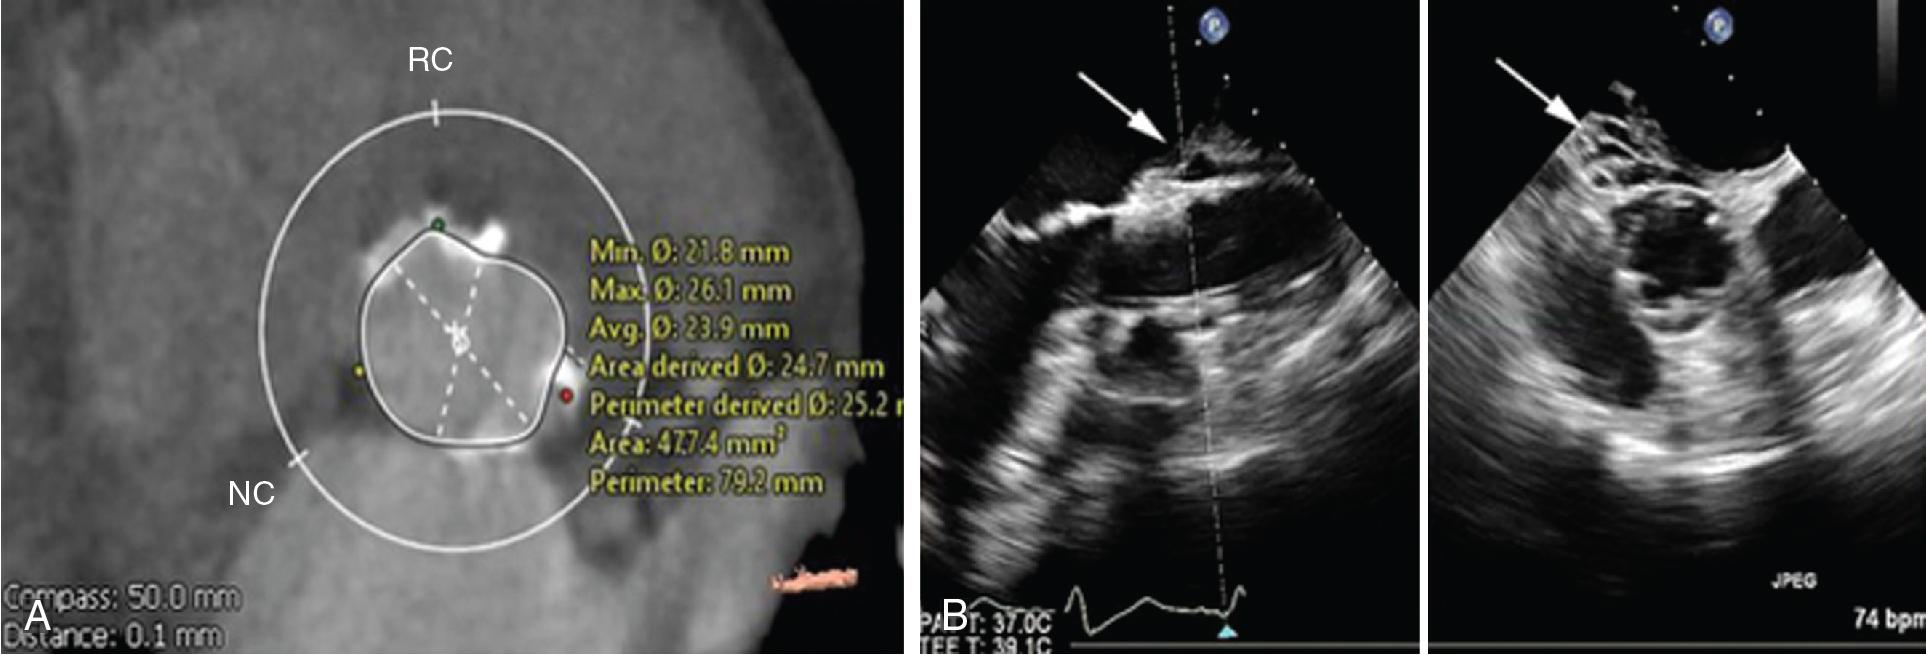 Fig. 13.3, Aortic Valve Annular Rupture During Transcatheter Aortic Valve Replacement.